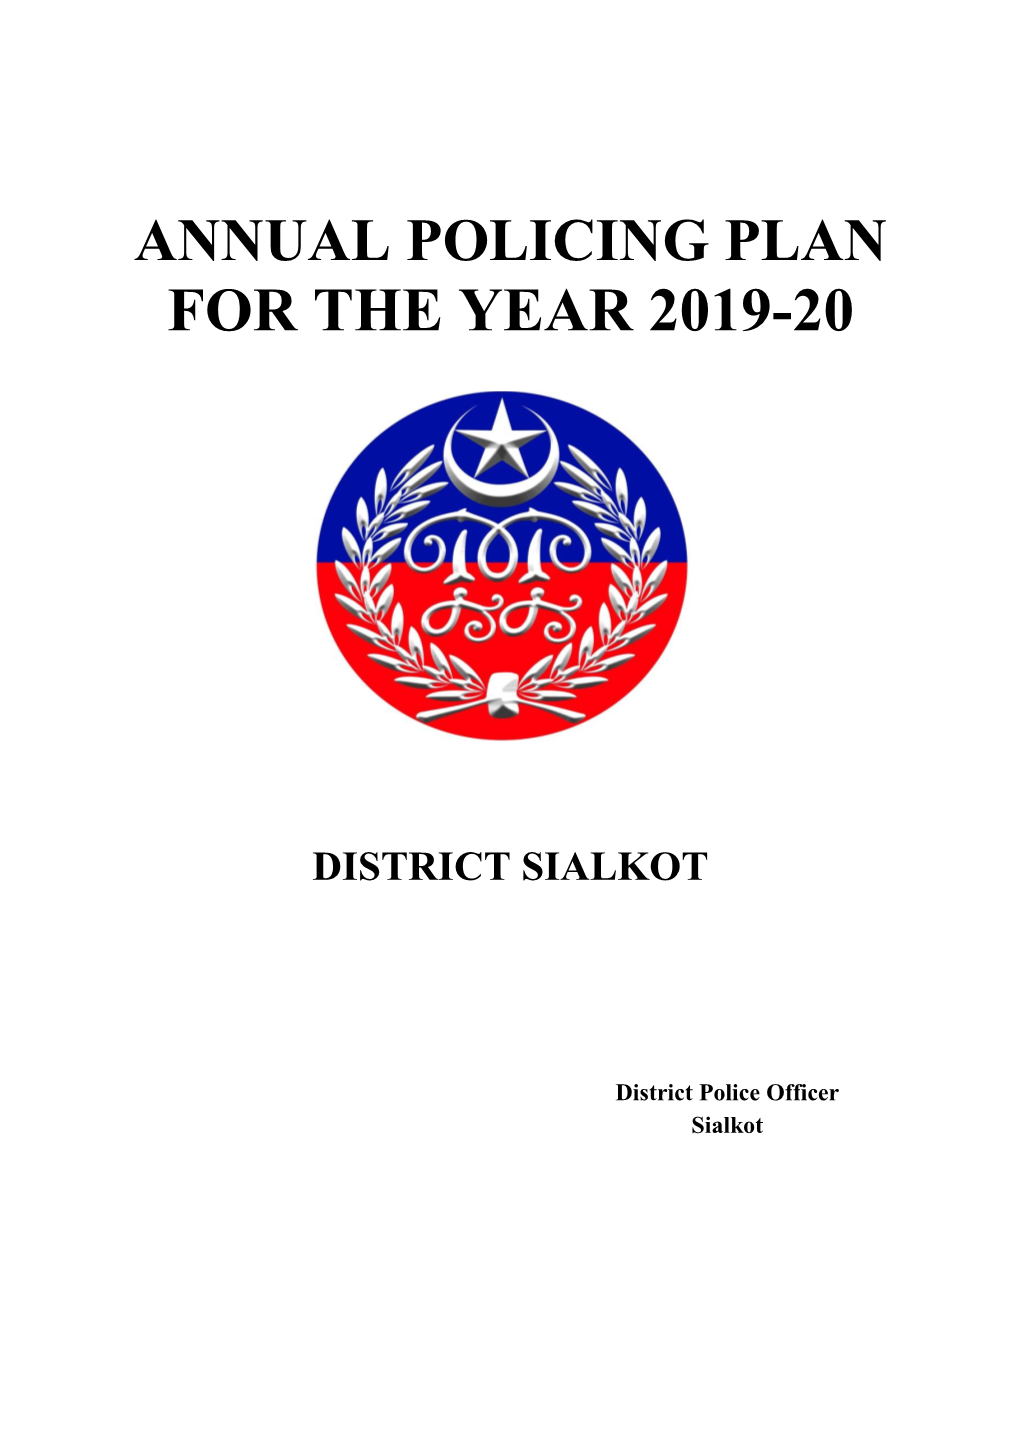 Annual Policing Plan for the Year 2019-20 District Sialkot